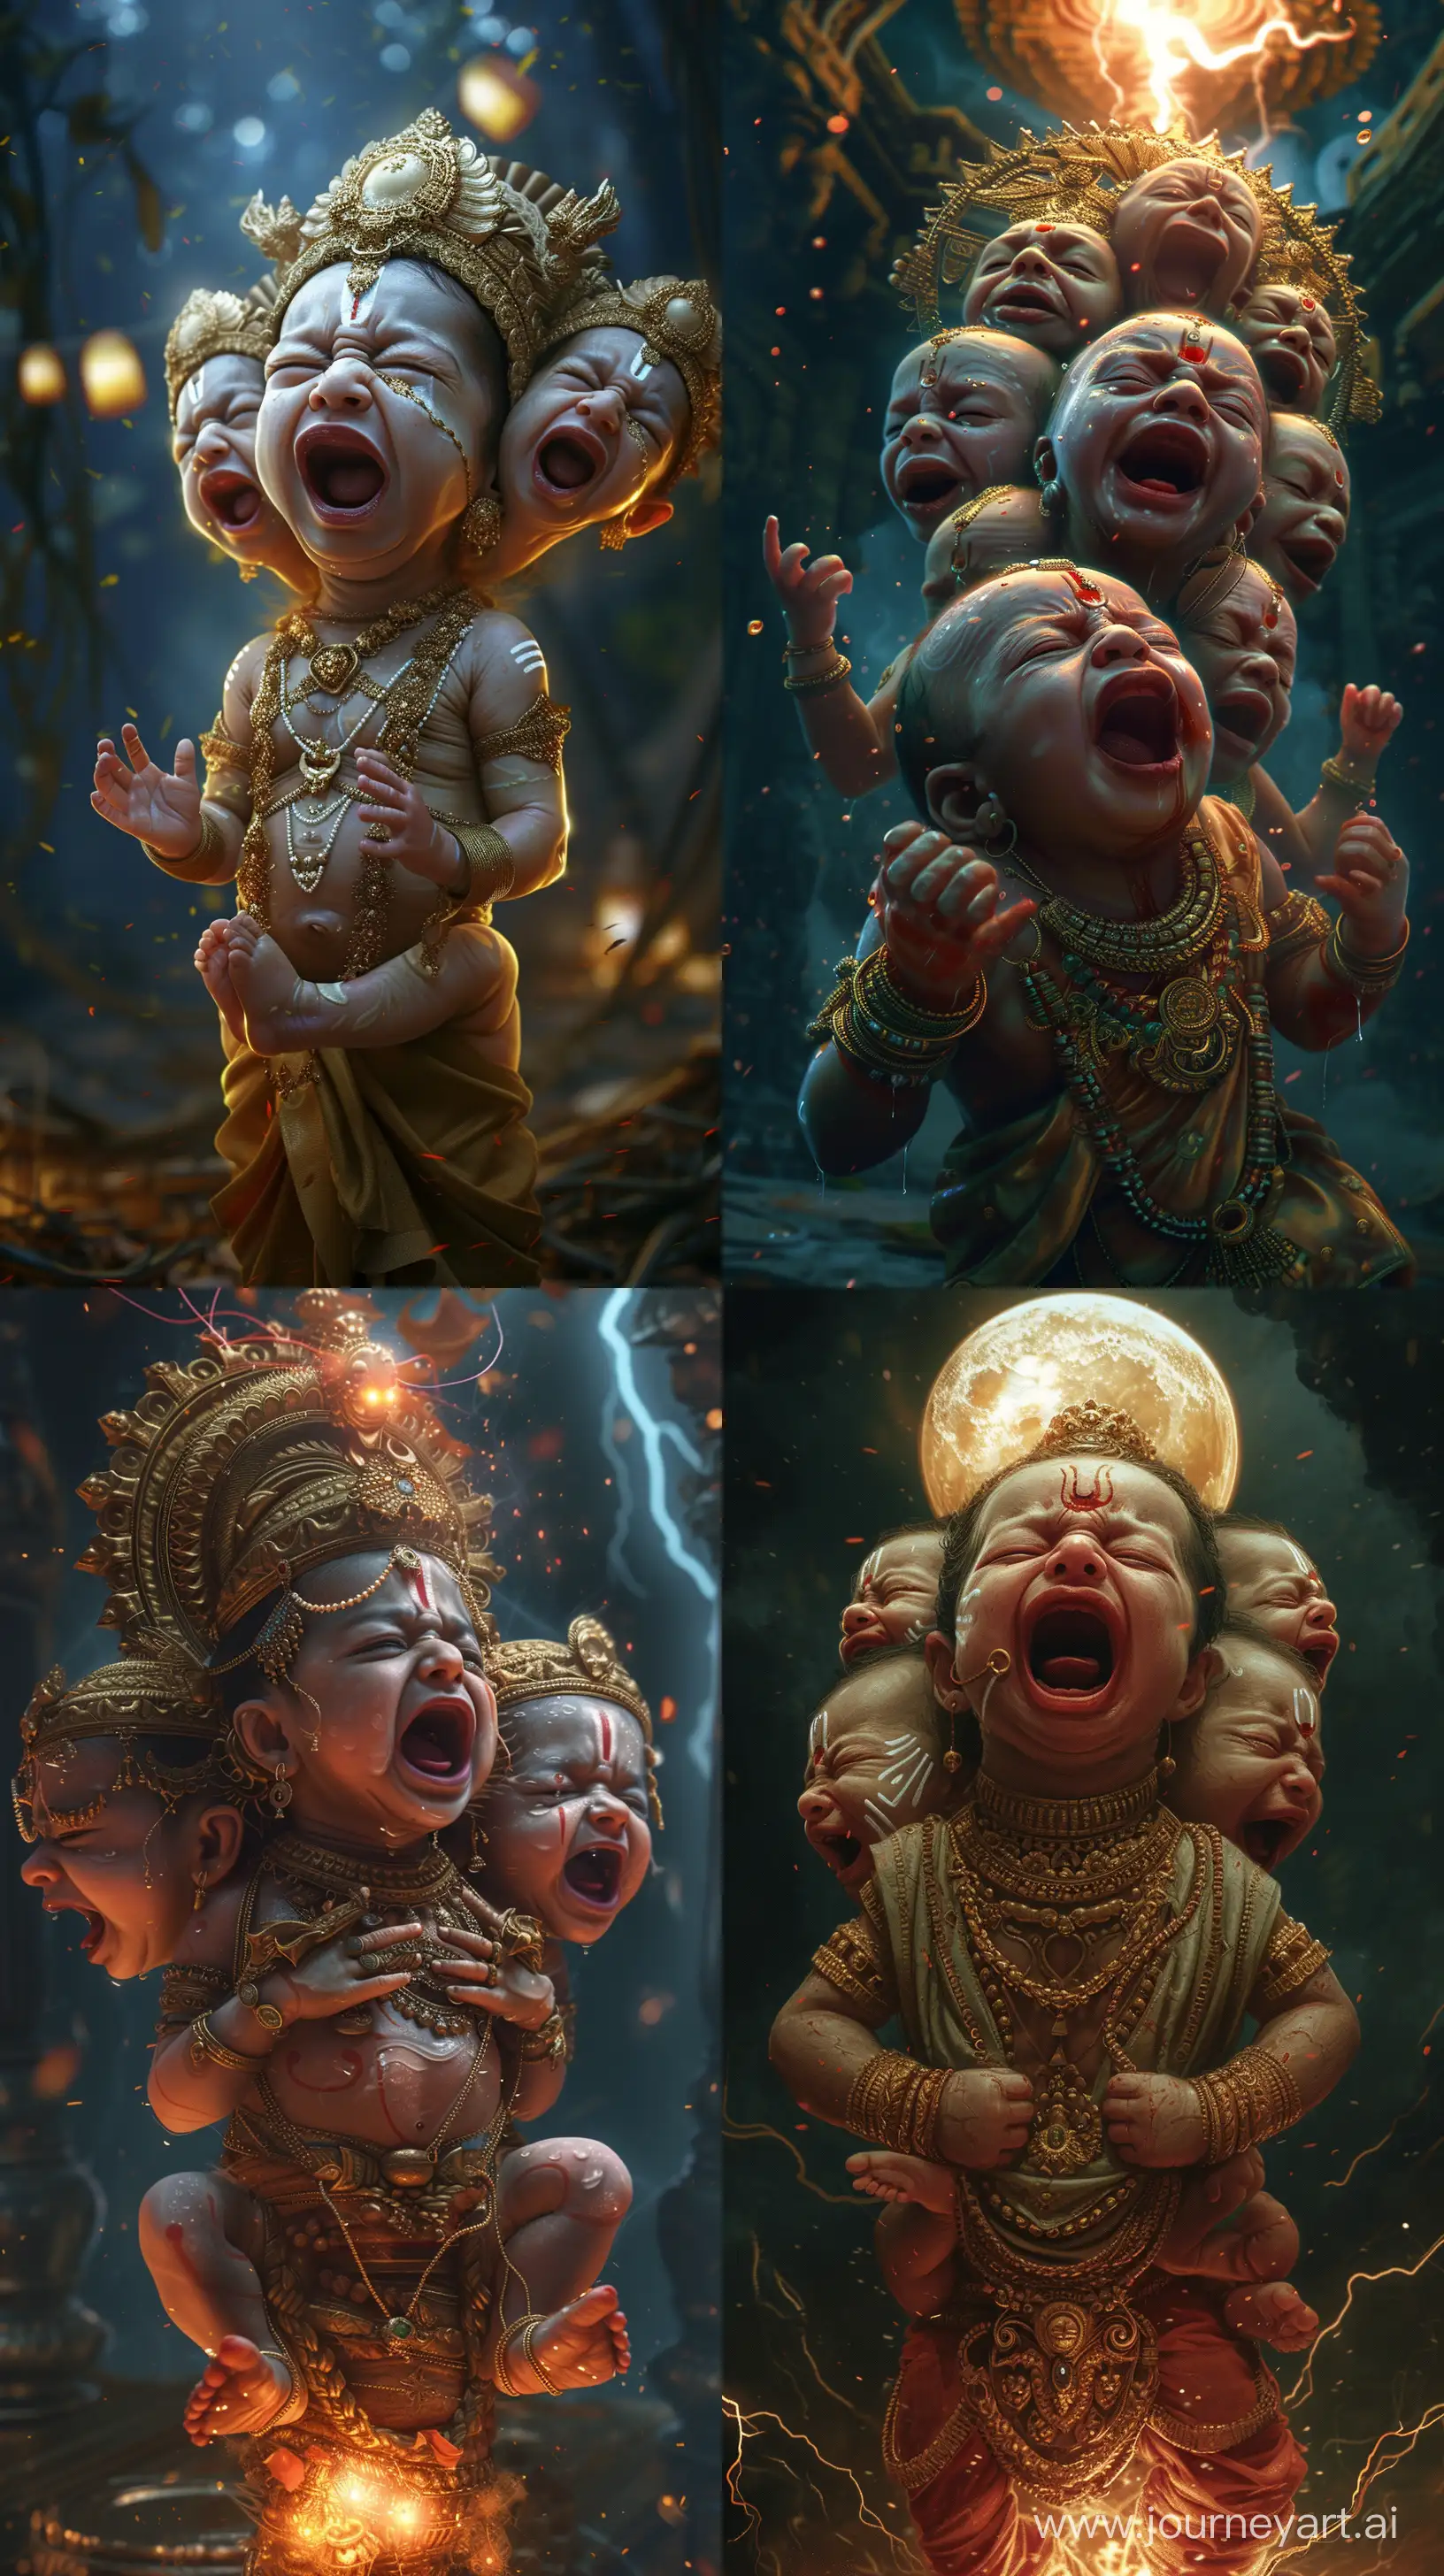 Realistic digital paintings depicting a new born baby from ancient Indian times with multiple heads, crying, lighting in the background, night time, intricate details, UHD, --ar 9:16 --v 6